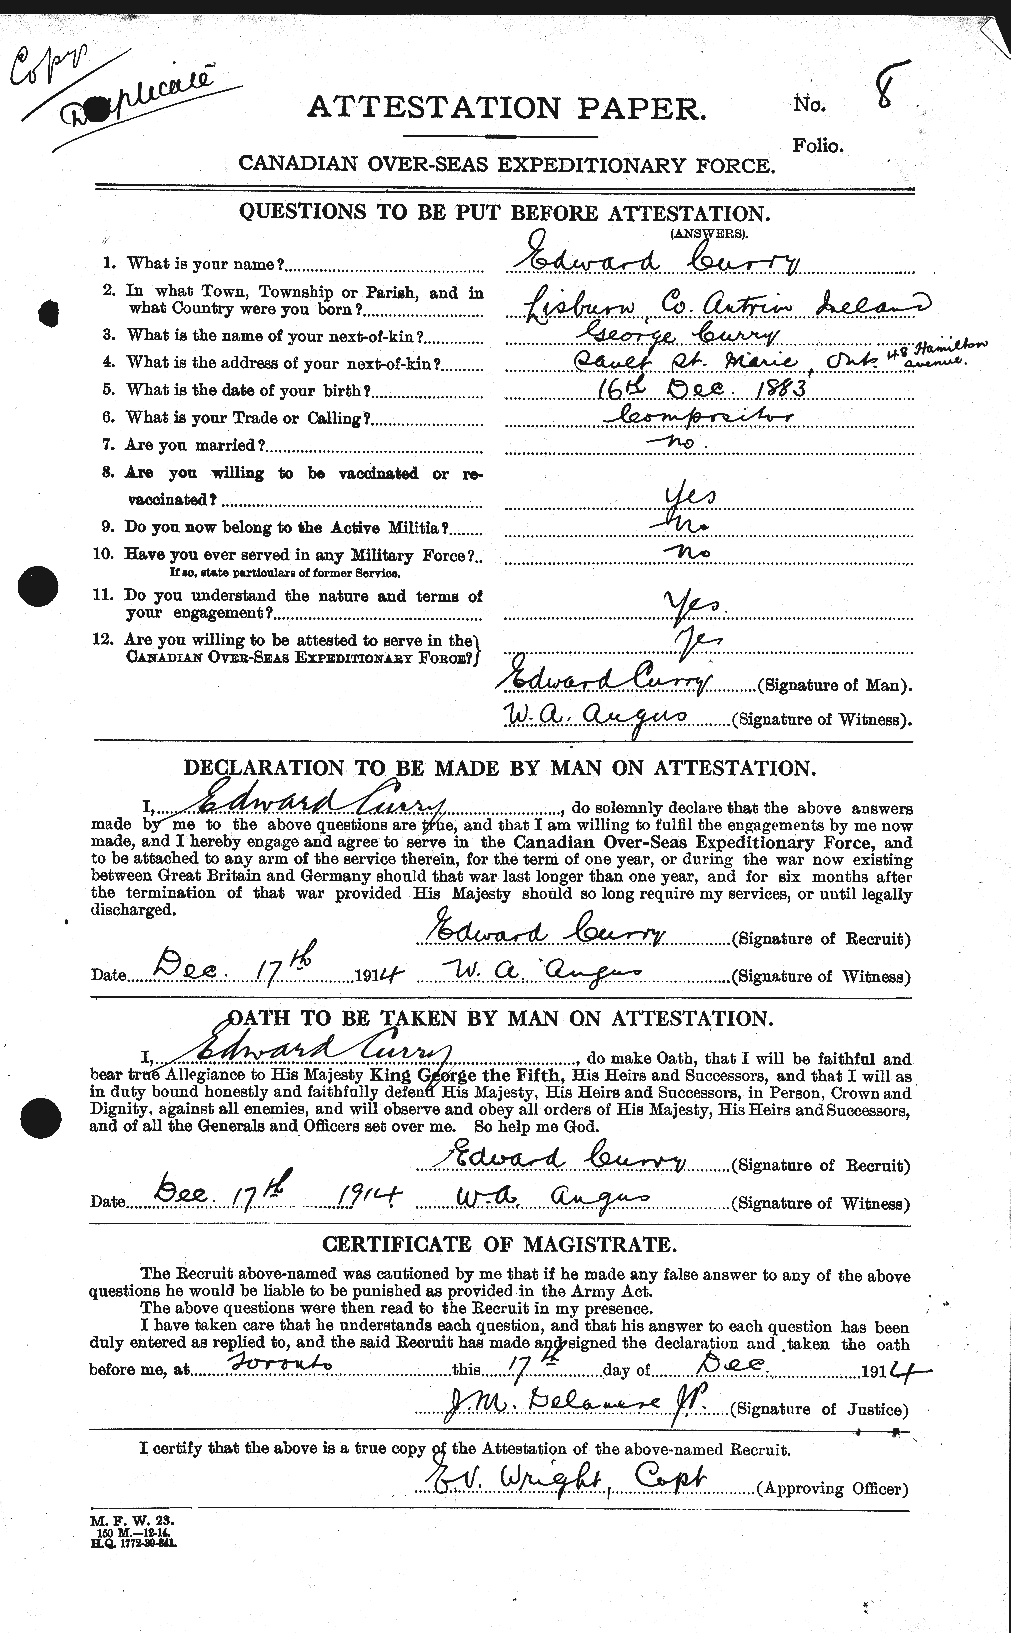 Personnel Records of the First World War - CEF 071199a